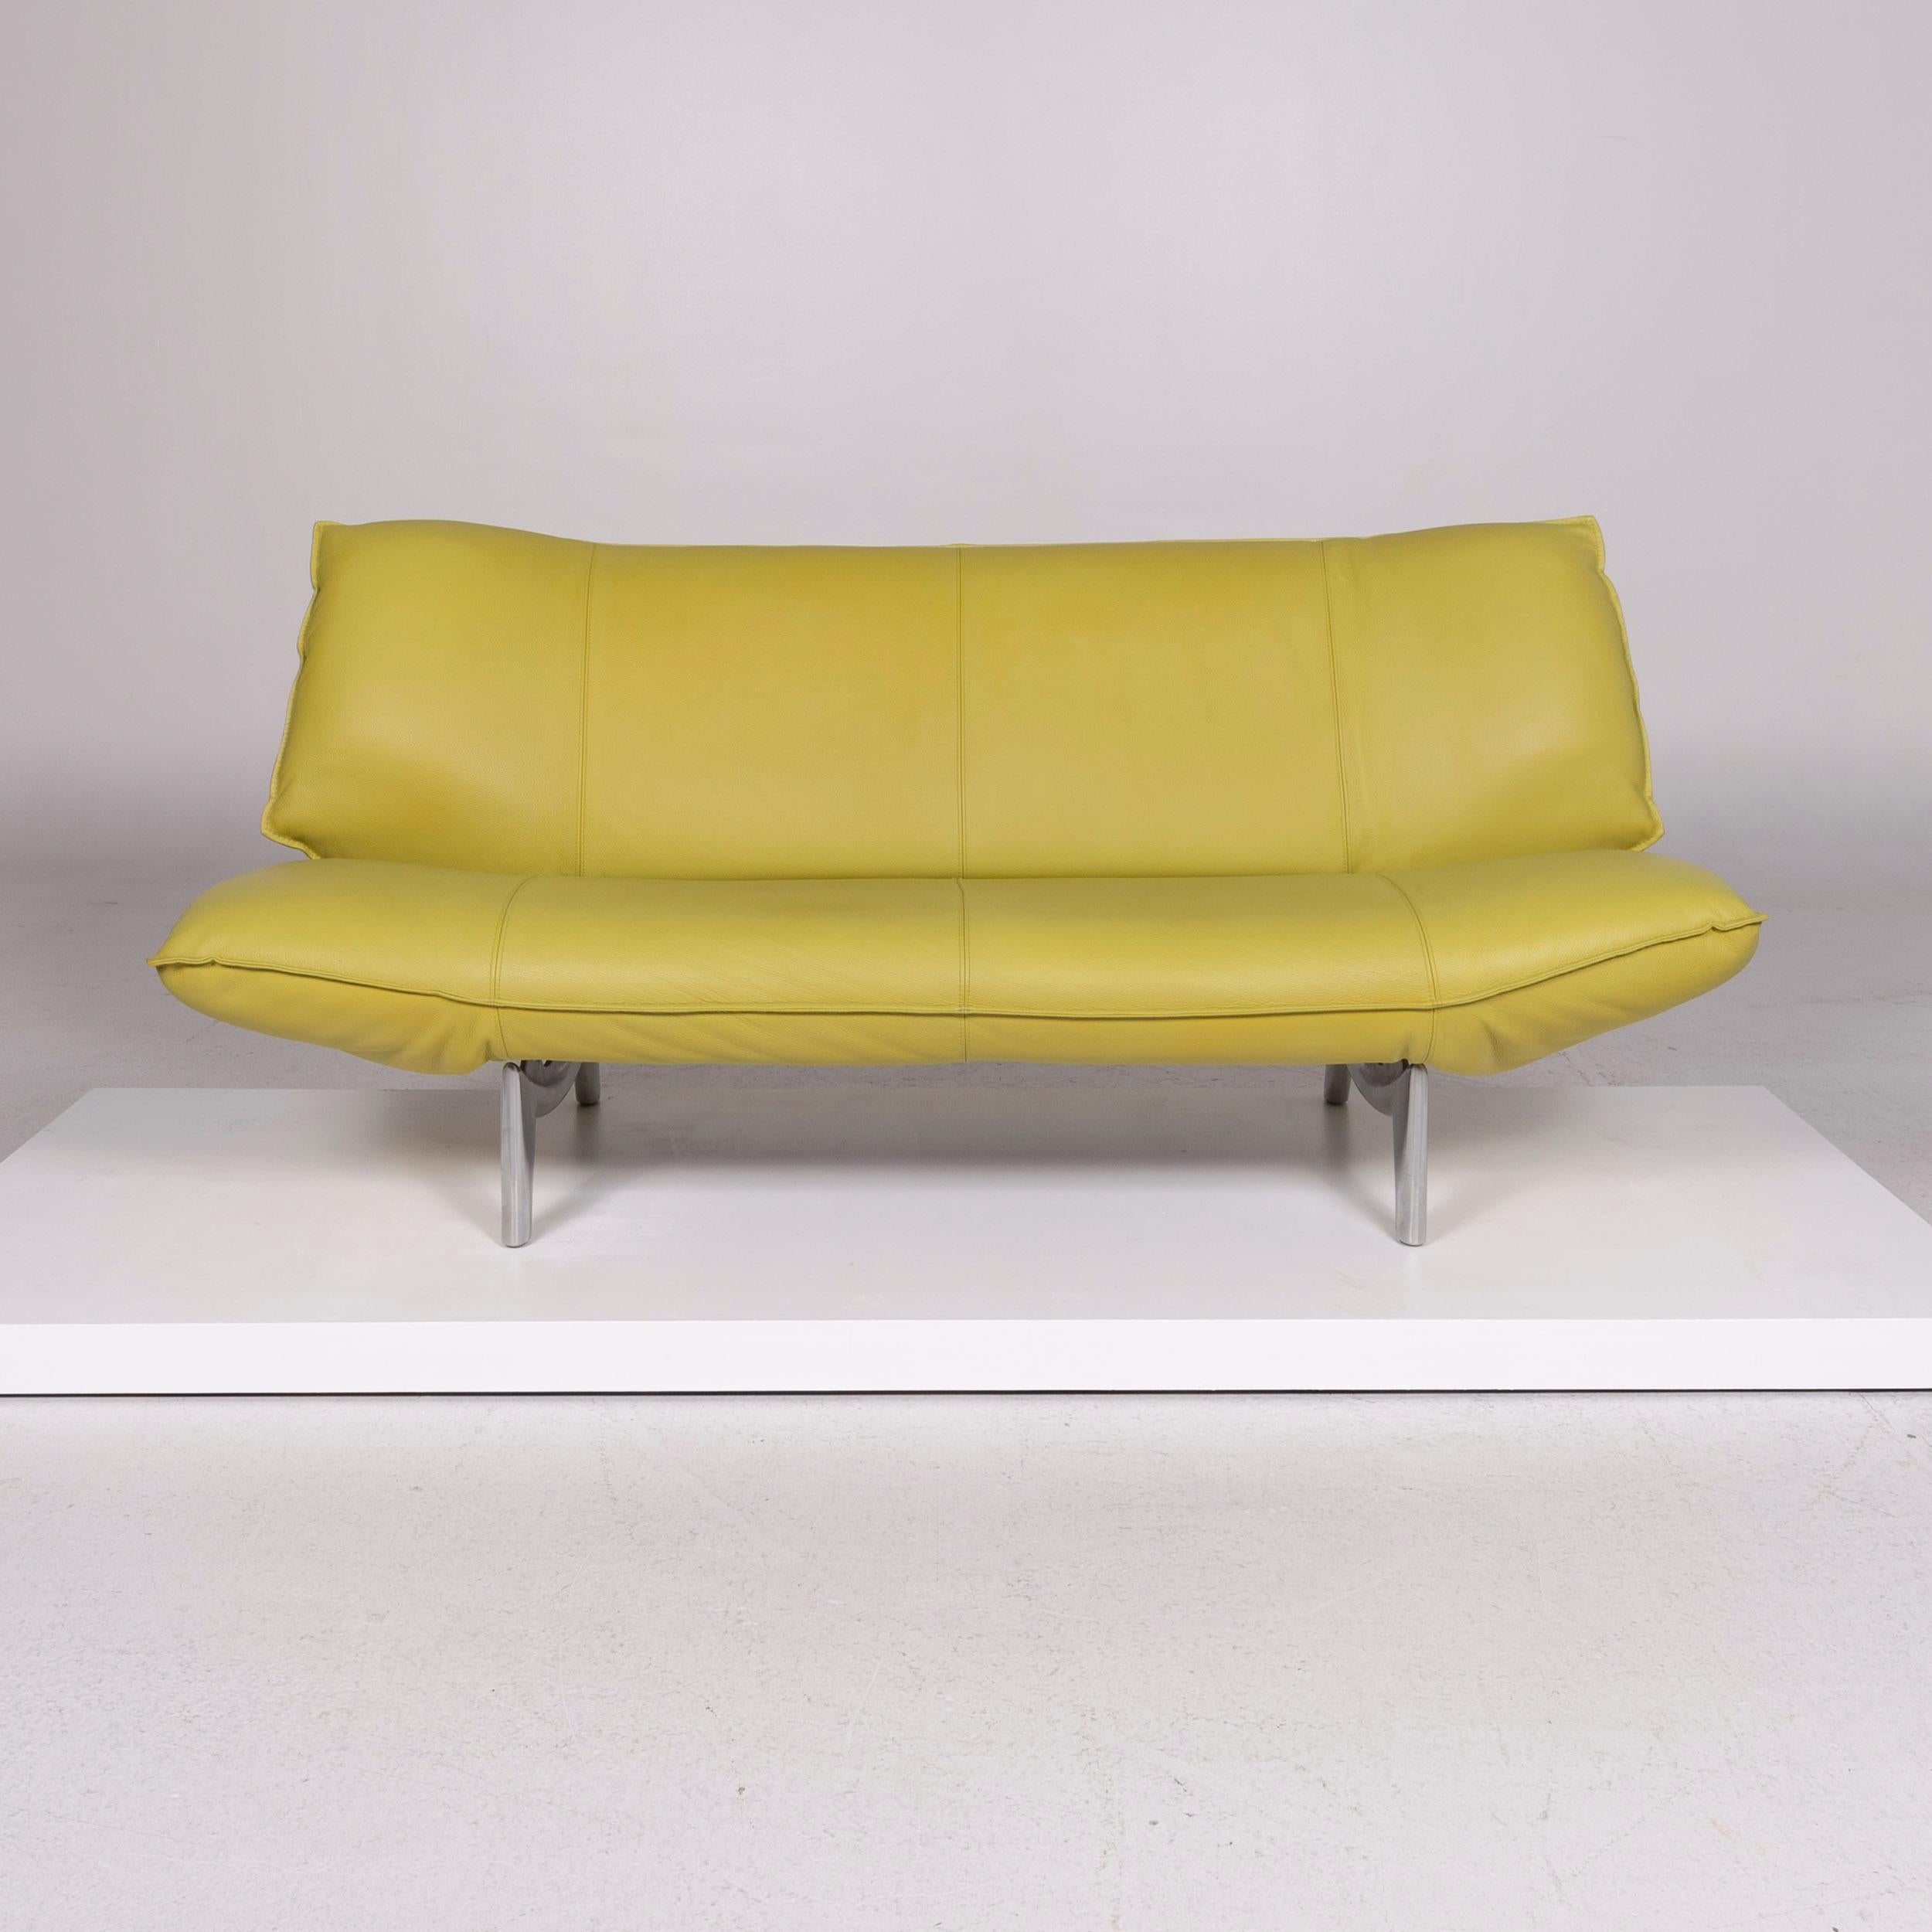 We bring to you a Leolux Tango leather sofa green lime green two-seat function couch.
 

 Product measurements in centimeters:
 

Depth 90
Width 168
Height 87
Seat-height 42
Rest-height 44
Seat-depth 55
Seat-width 103
Back-height 40.
 